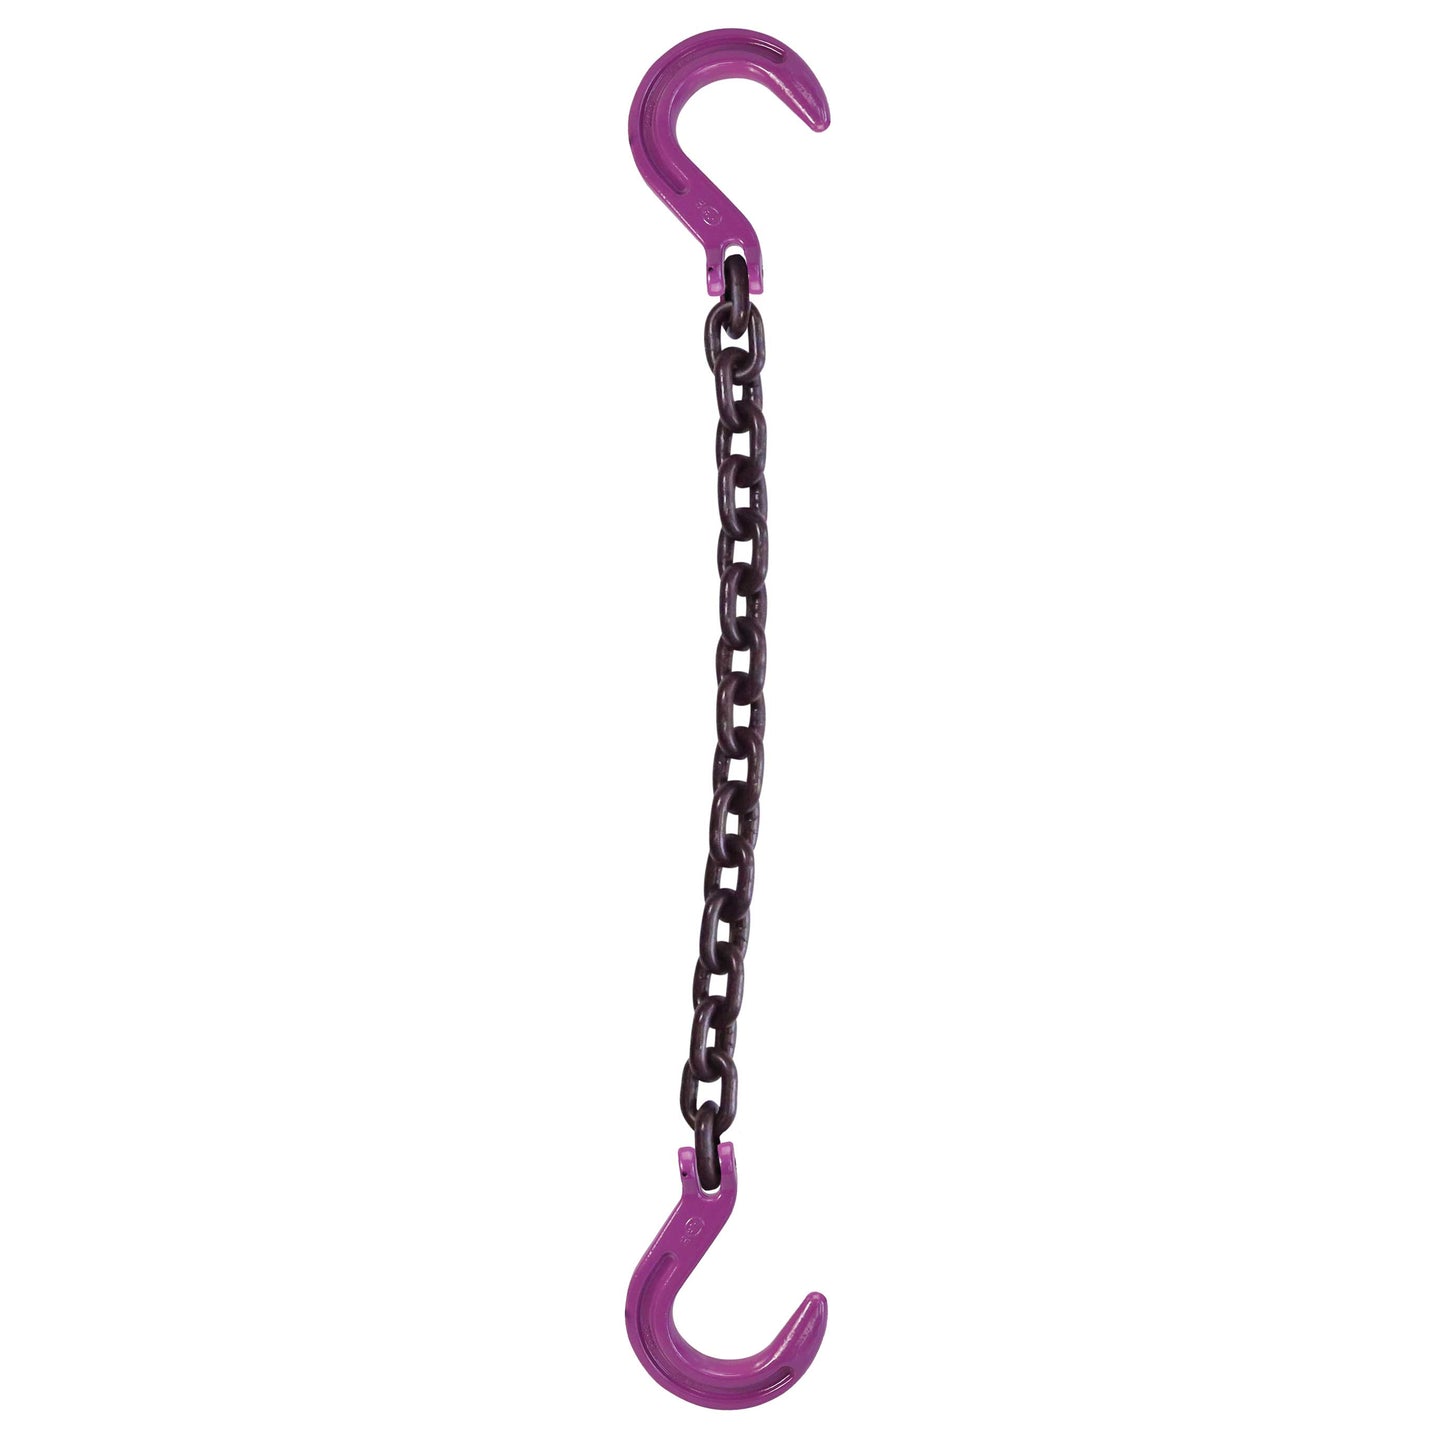 516 inch x 14 foot Single Leg Chain Sling w Foundry & Foundry Hooks Grade 100 image 1 of 2